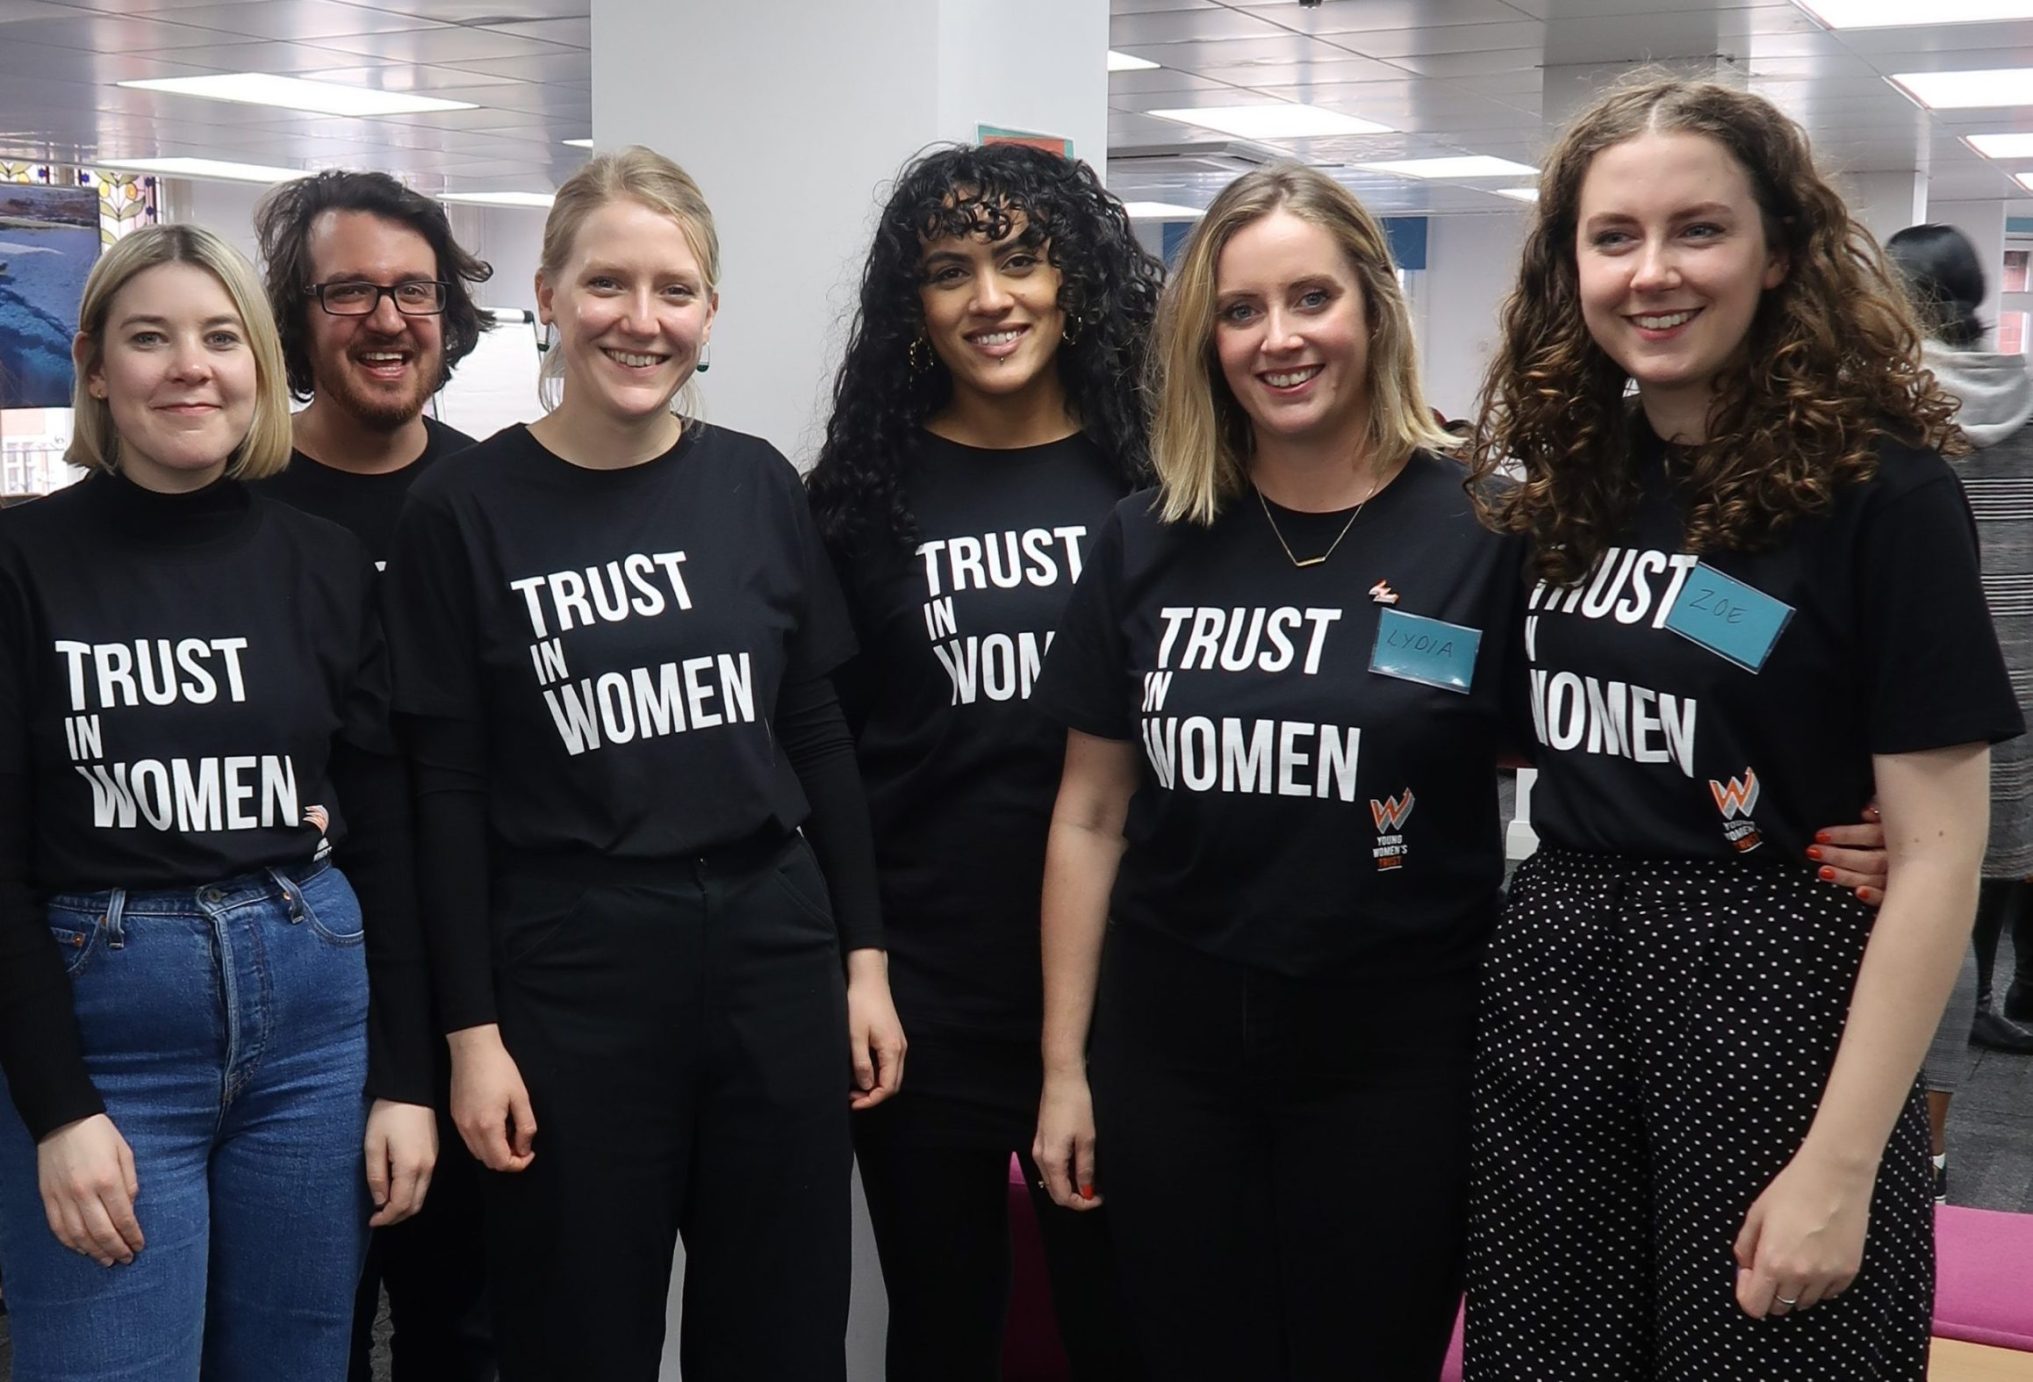 Members of the Young Women's Trust team at an event